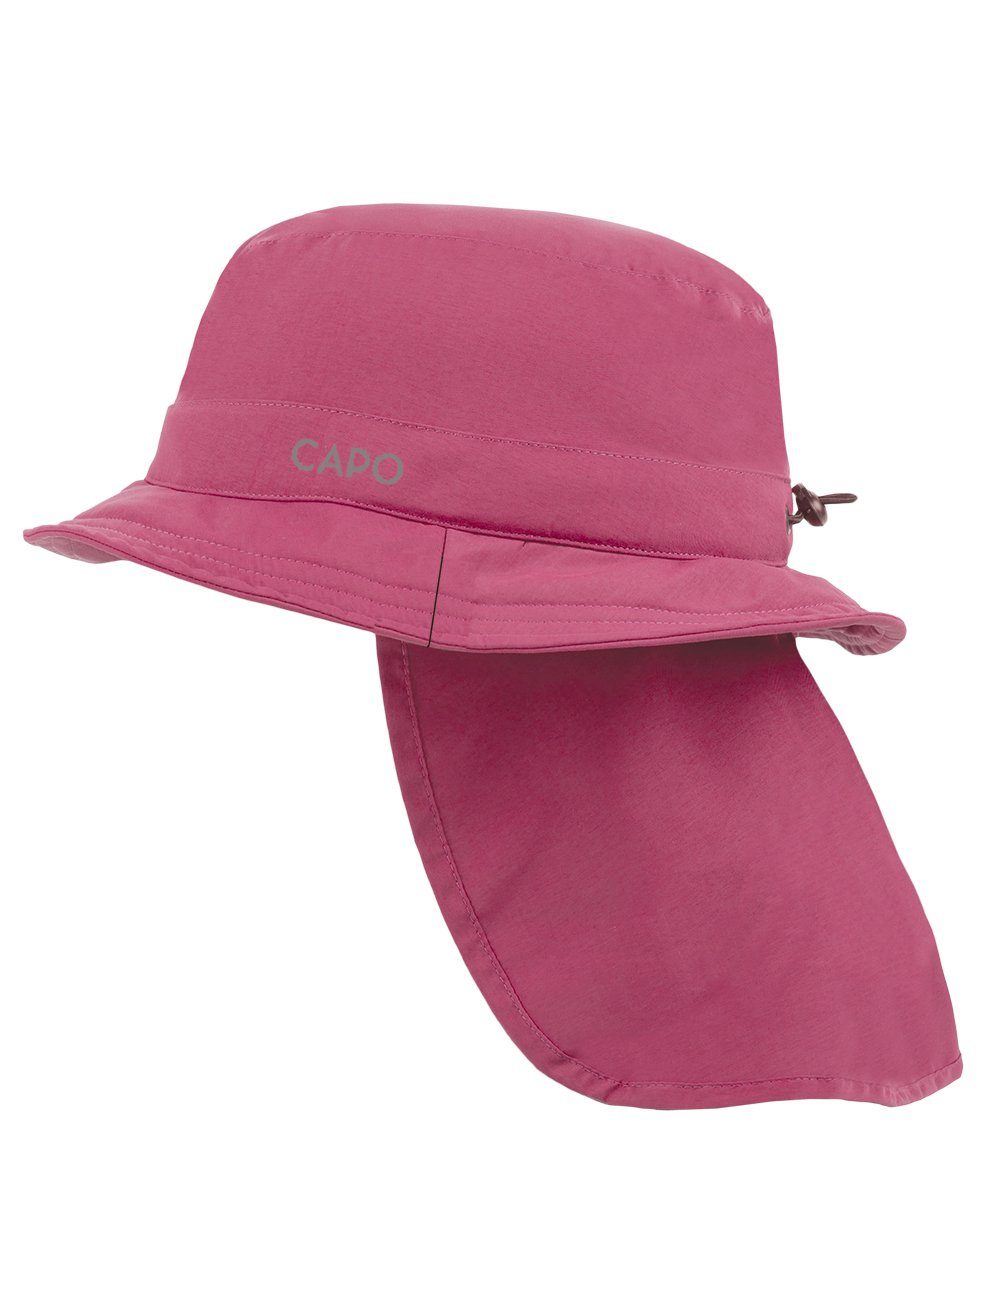 CAPO Sonnenhut CAPO-LIGHT HIKING HAT Made in Europe pink | Sonnenhüte